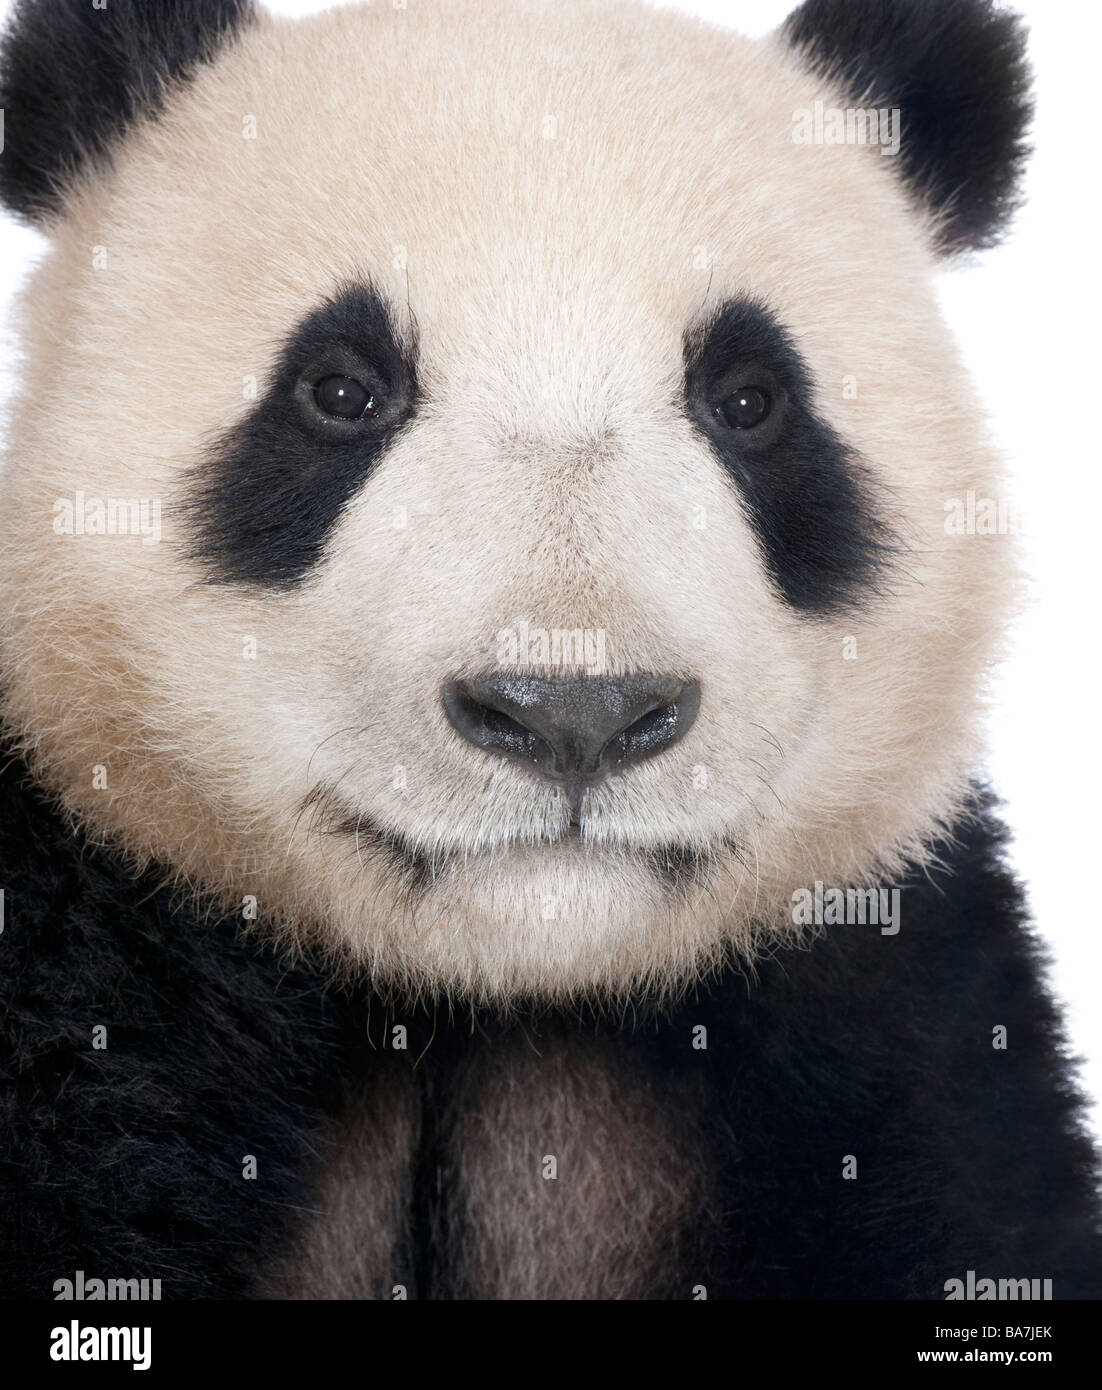 Giant Panda (18 months) - Ailuropoda melanoleuca in front of a white background Stock Photo